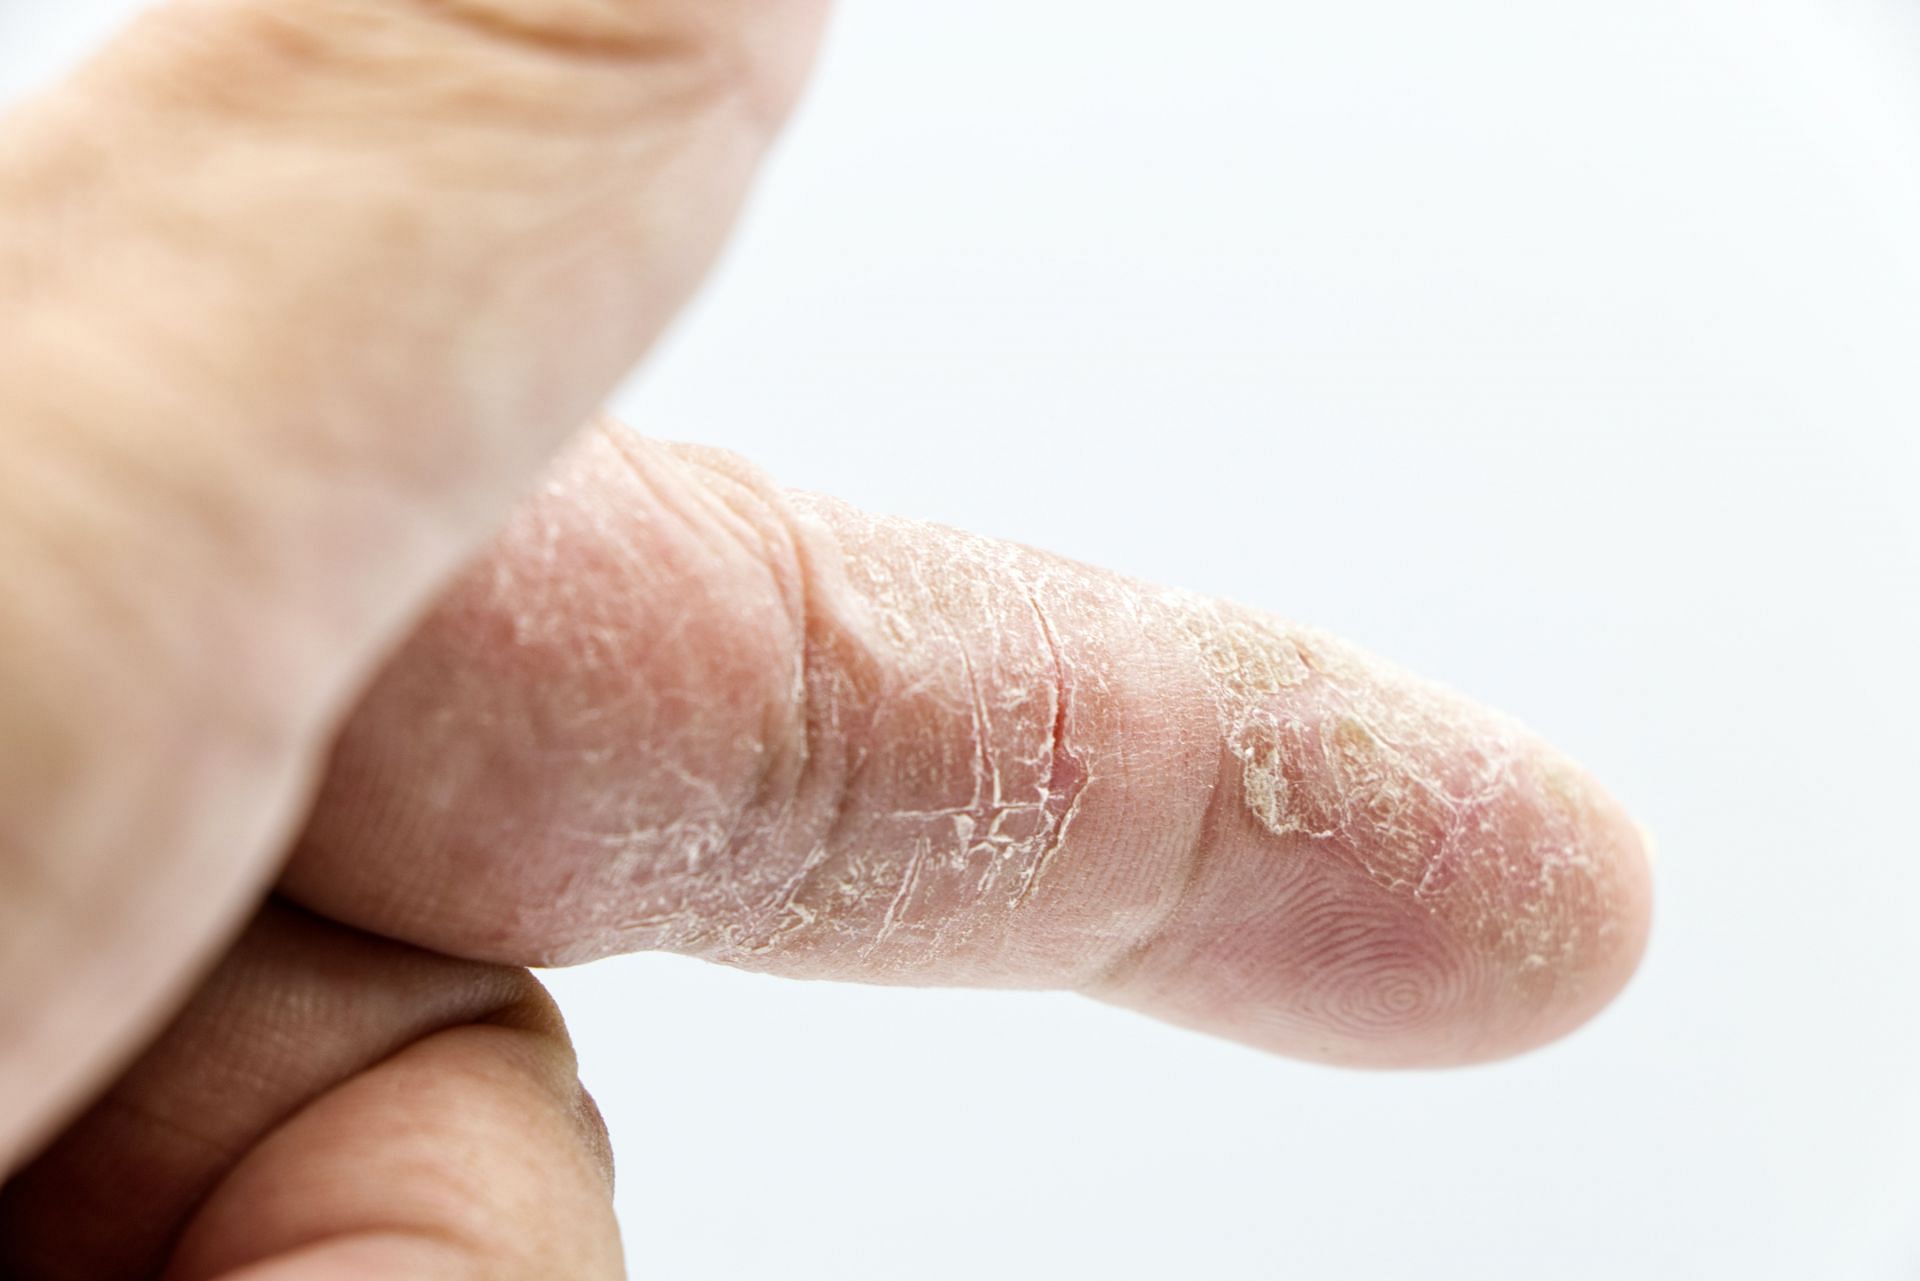 Dry skin is one of the main reasons why you might be feeling itchy all over the body. (Image via pexels/Srattha Nualsate)